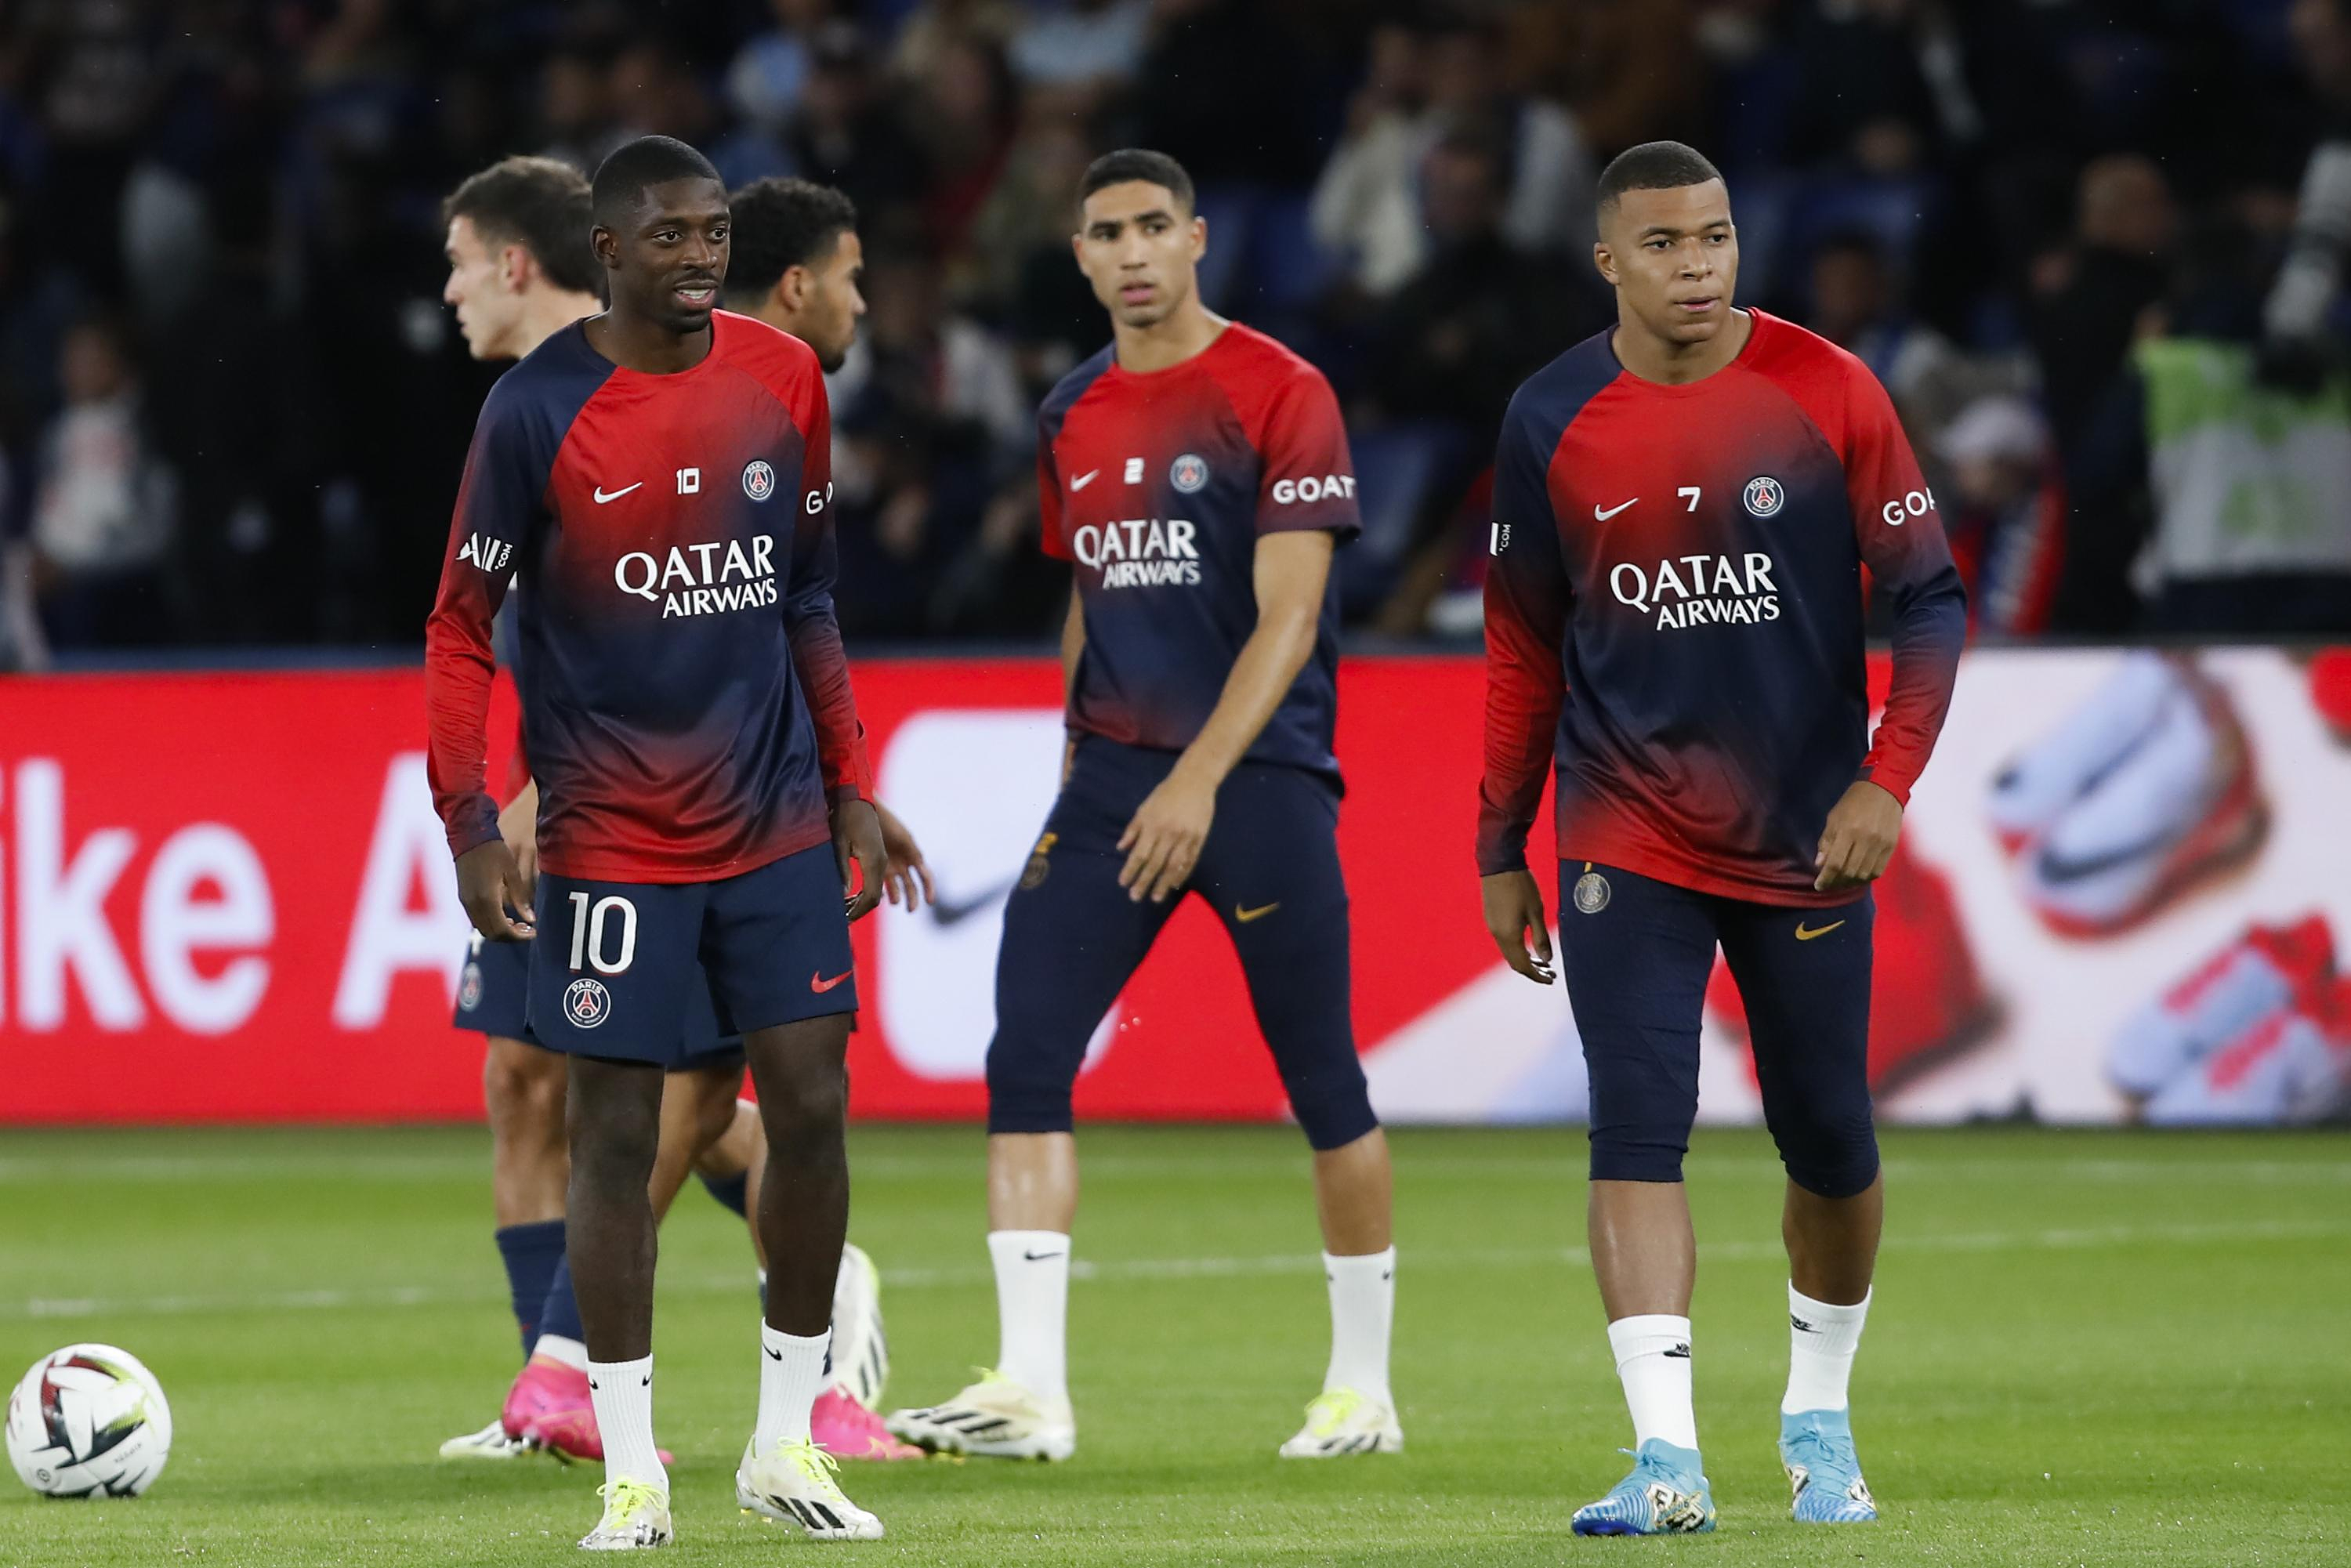 PSG-Brest: the return of the Dembélé/Hakimi axis, Brassier disrupts… Favorites and scratches